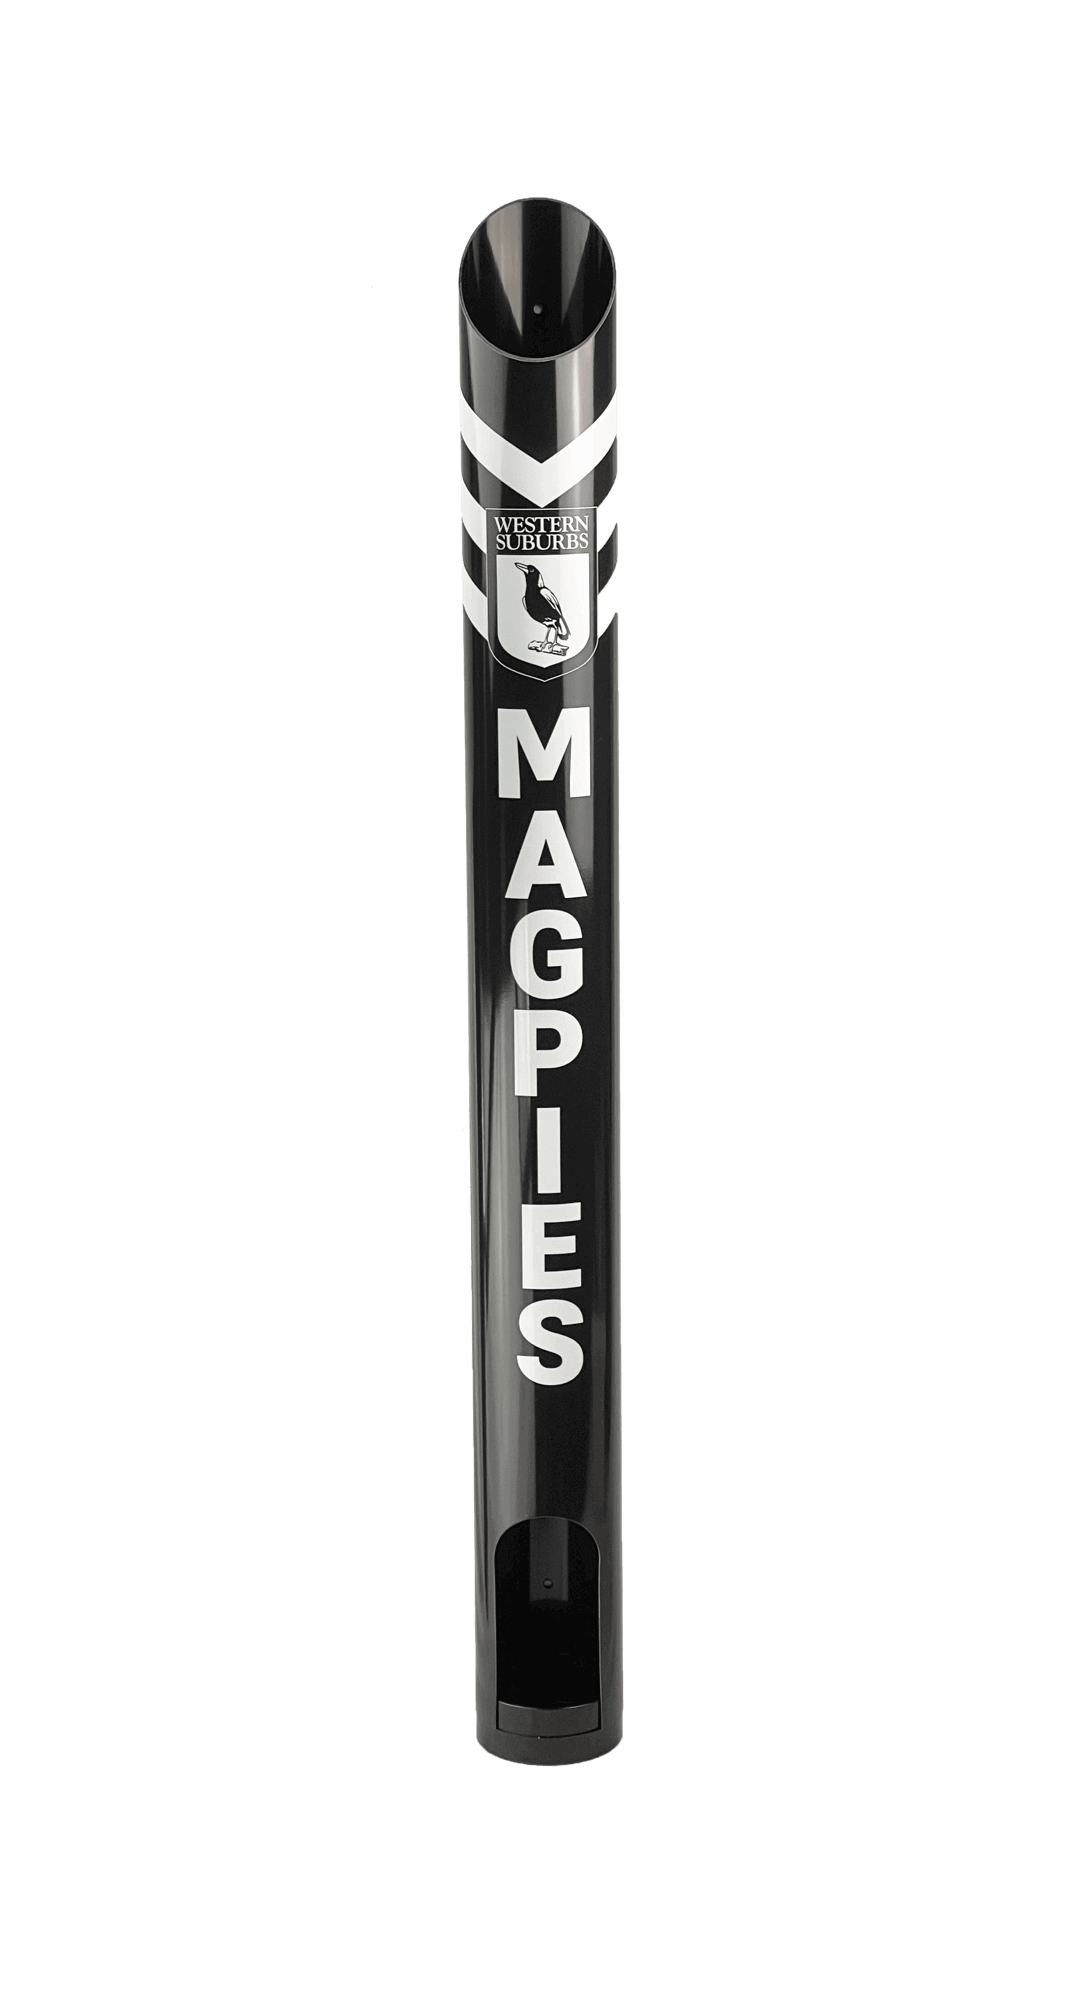 RETRO WESTERS MAGPIES NRL DISPENSER_WESTERS SUBURBS MAGPIES MAGPIES_STUBBY CLUB